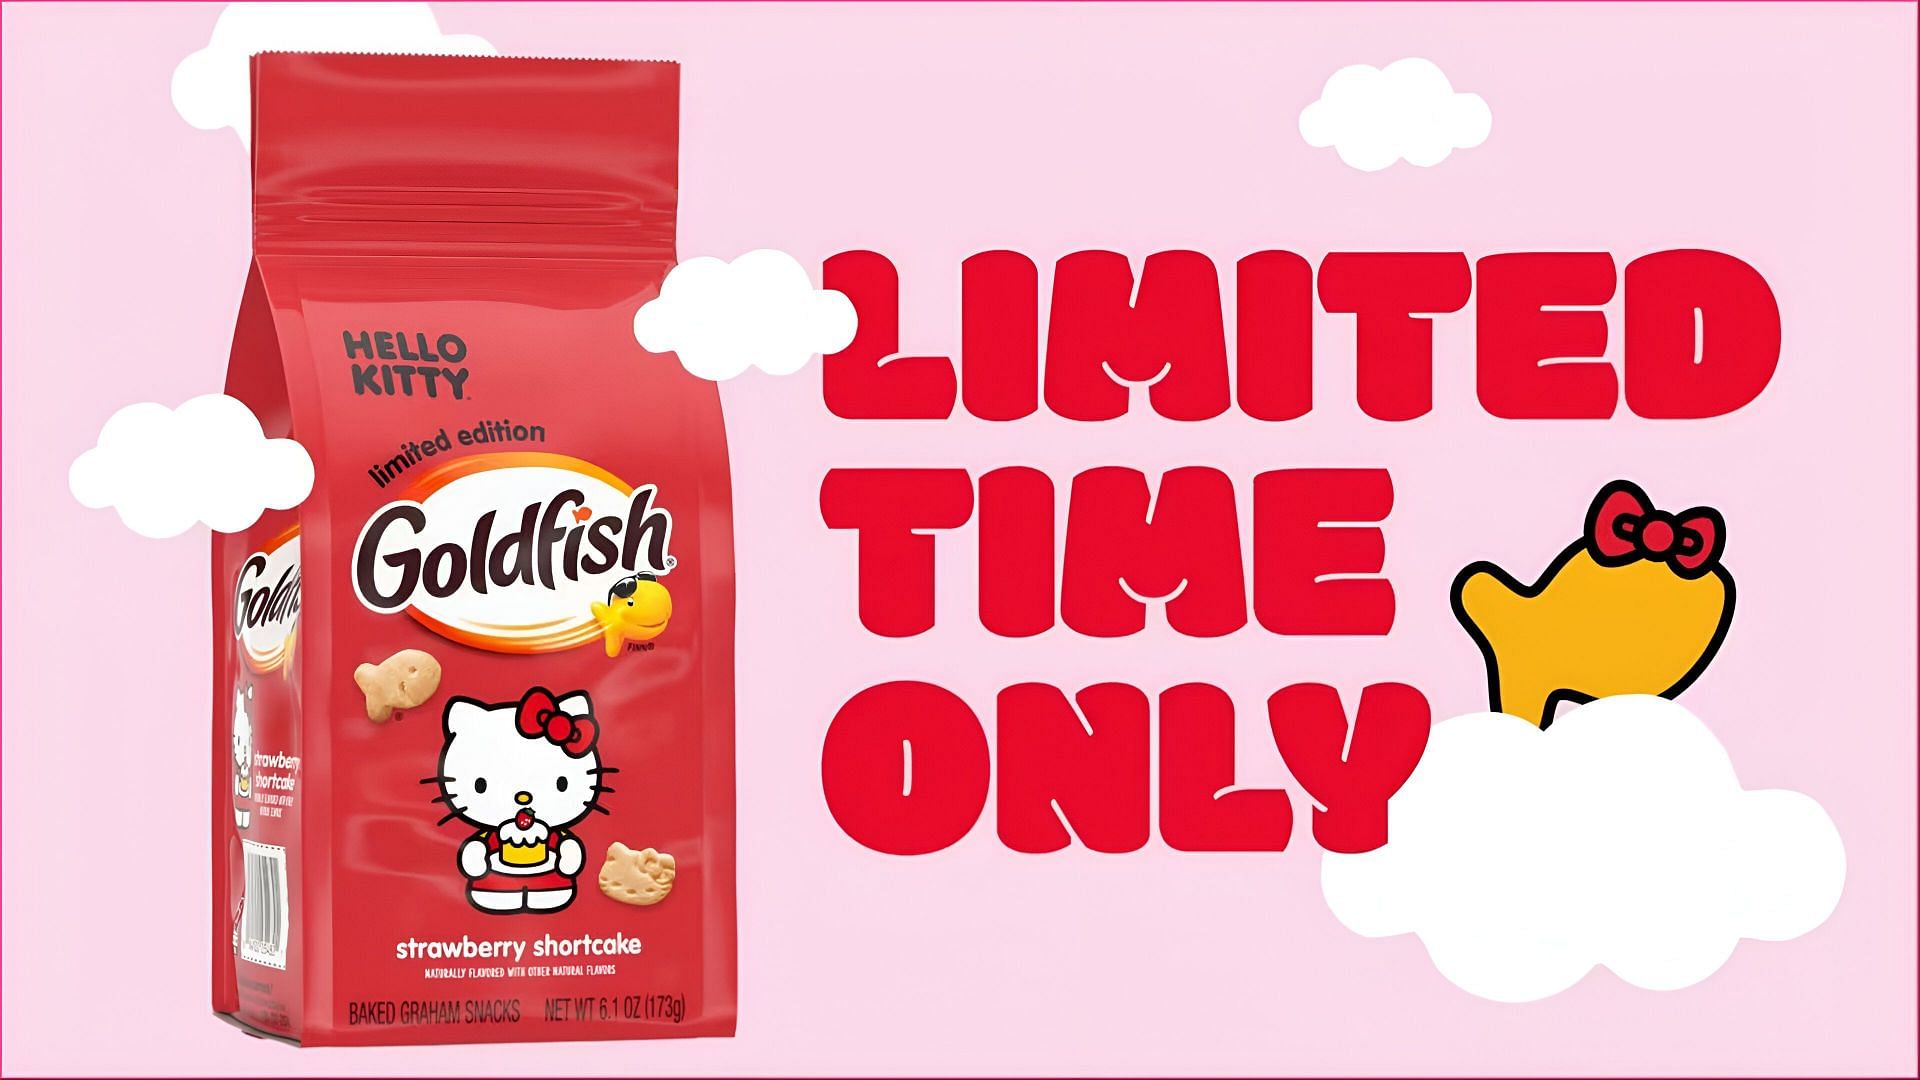 The Hello Kitty Strawberry Shortcake Graham Crackers are priced at over $3.69 (Image via Goldfish)